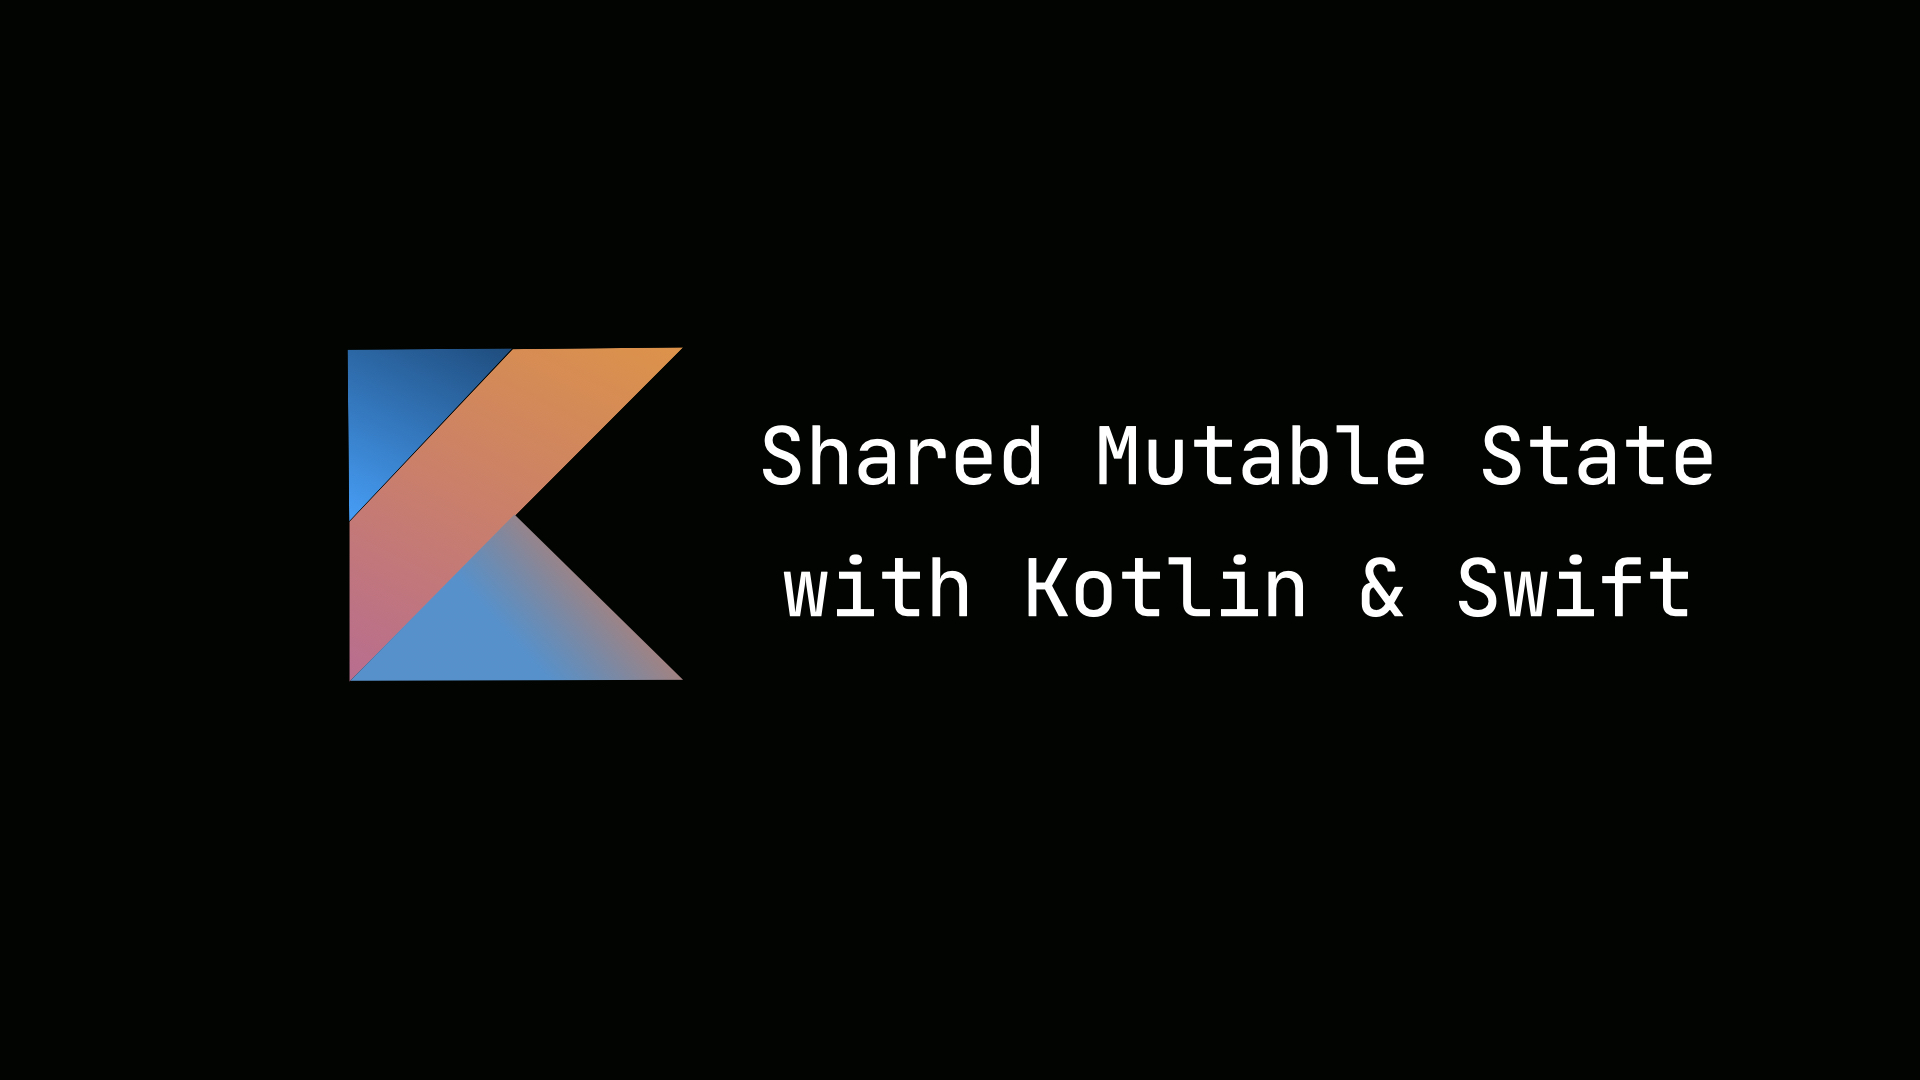 Shared Mutable State with Kotlin and Swift